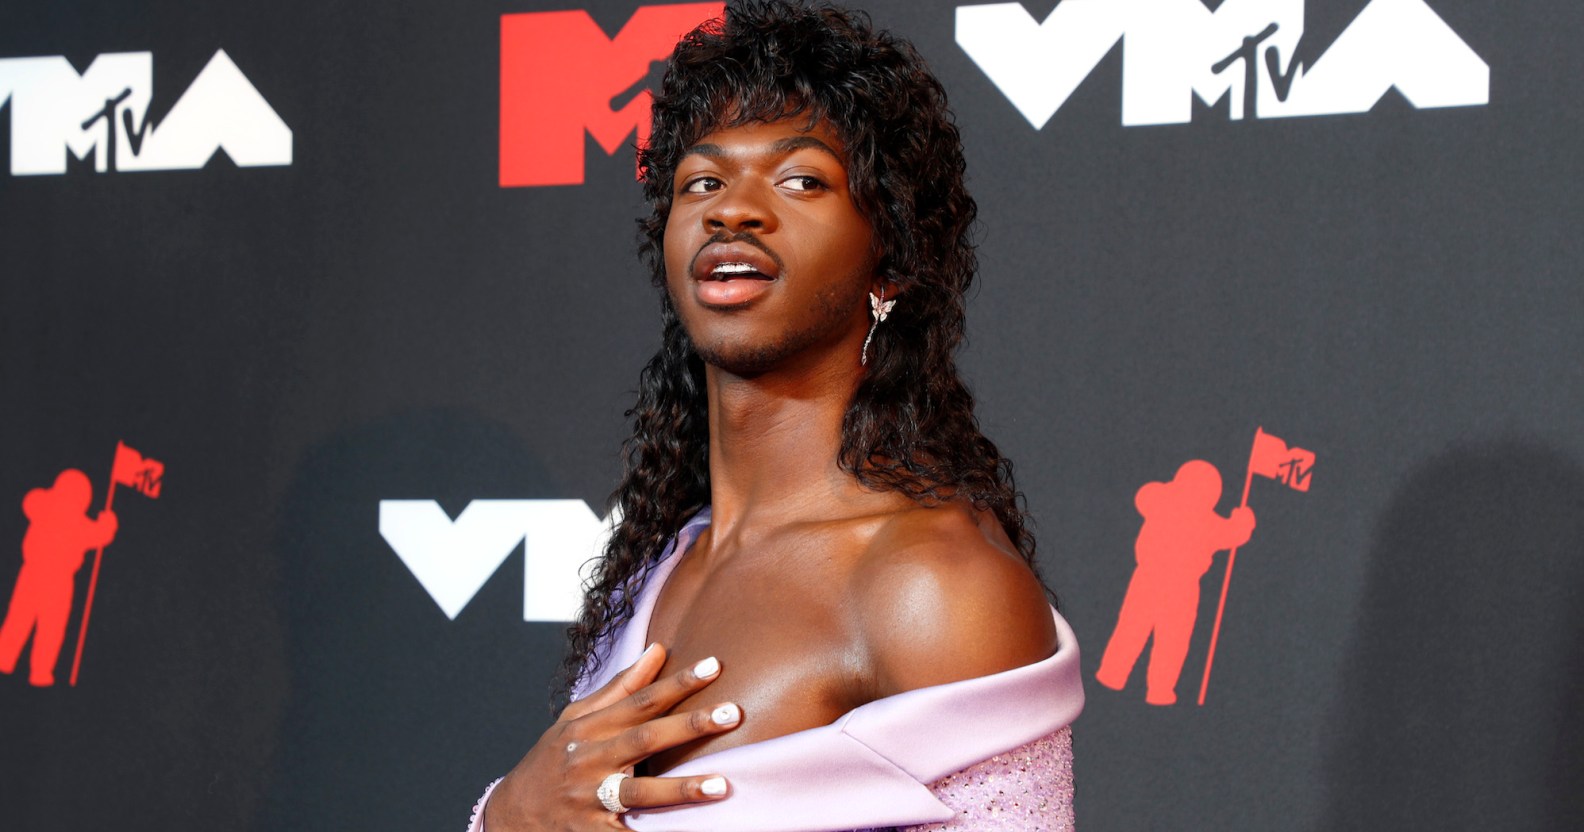 Lil Nas X wears a long black wig and off-the-shoulder lilac dress at the MTV VMAs 2021